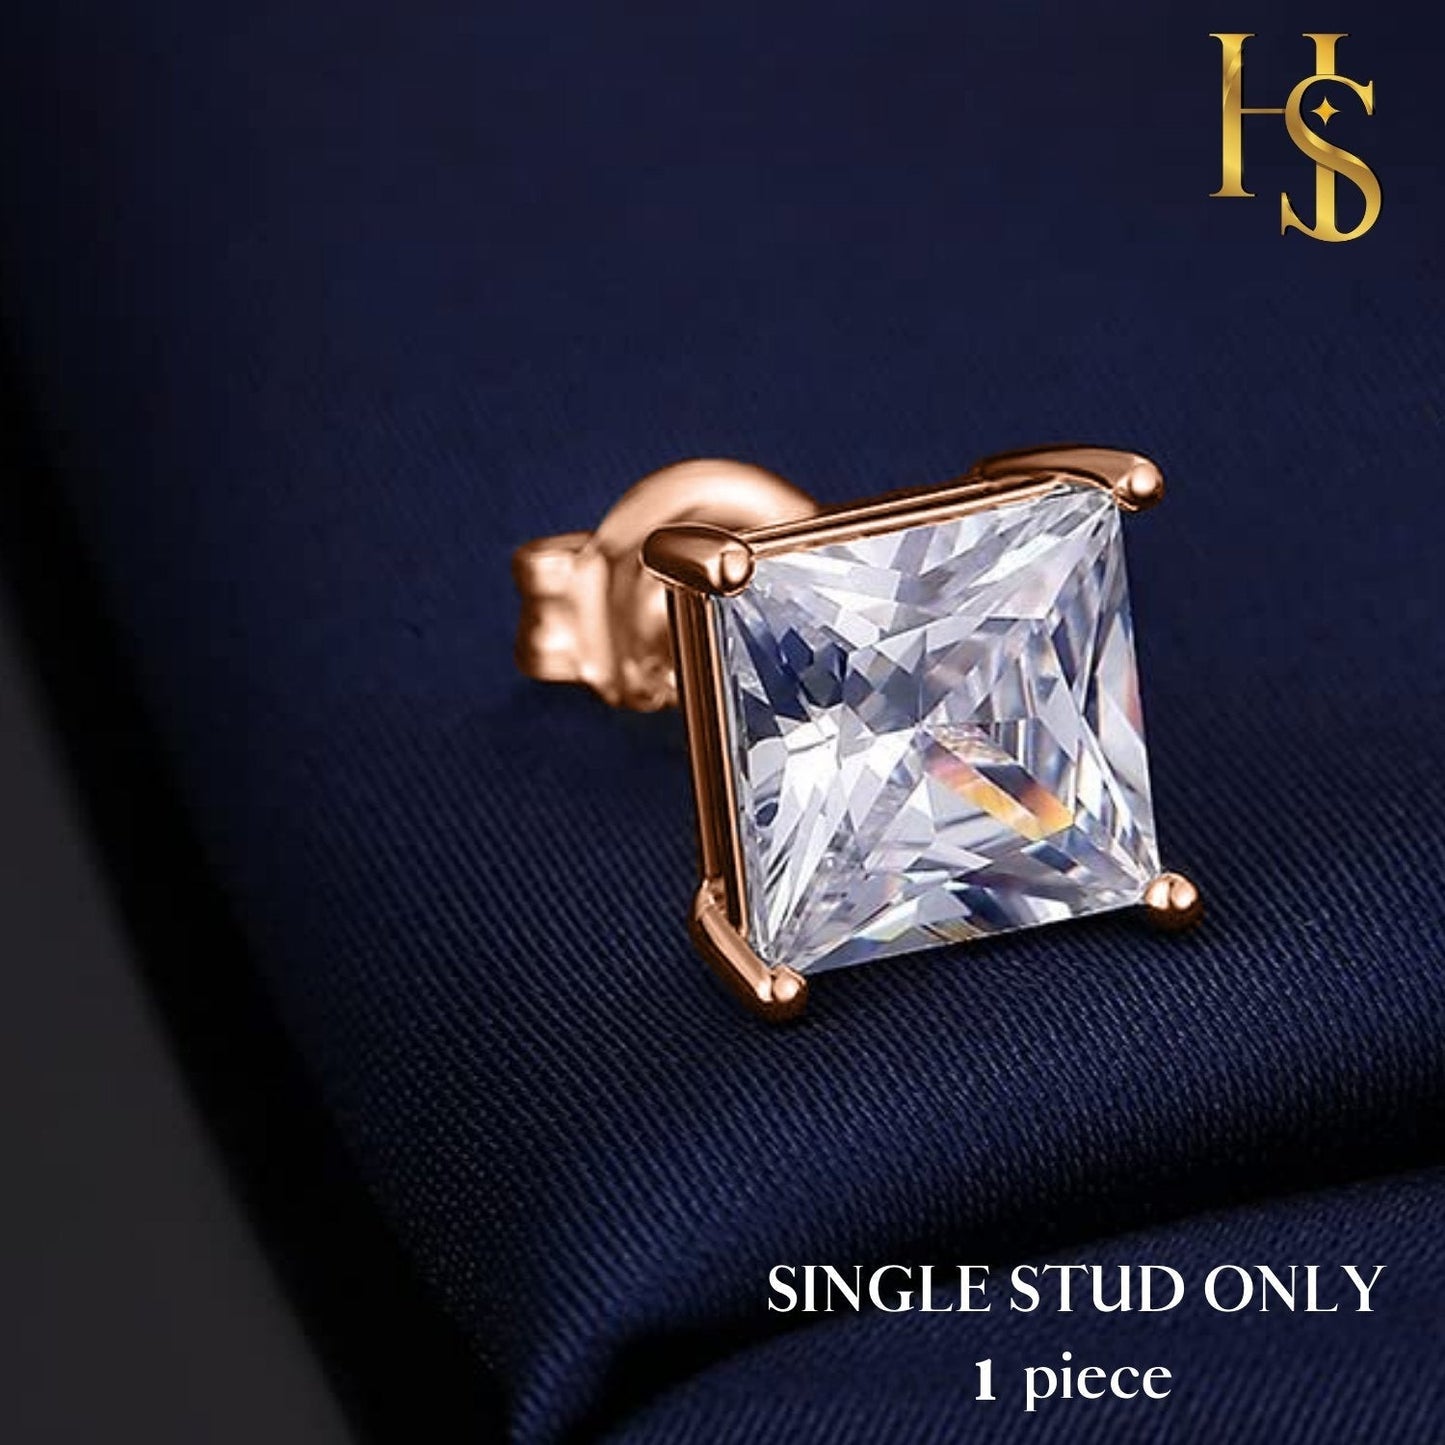 Mens Rose Gold Square Solitaire Earring embellished with Swarovski Zirconia - 92.5 Silver in 18K Rose Gold Finish